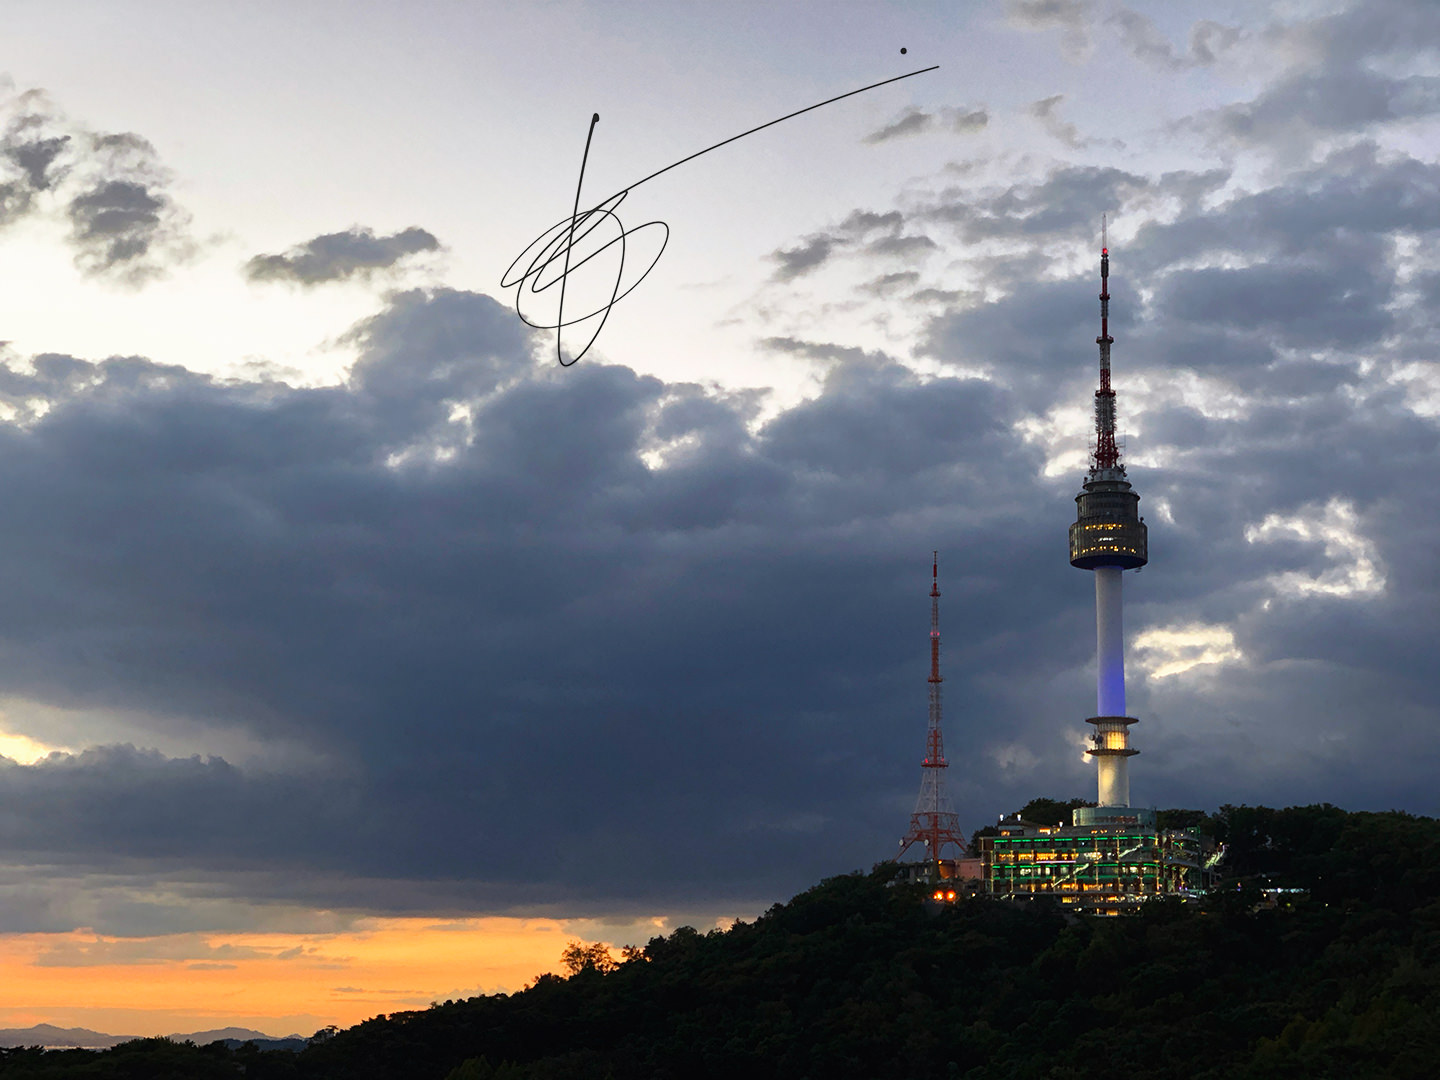 N Seoul Tower on top of the hill at sunset